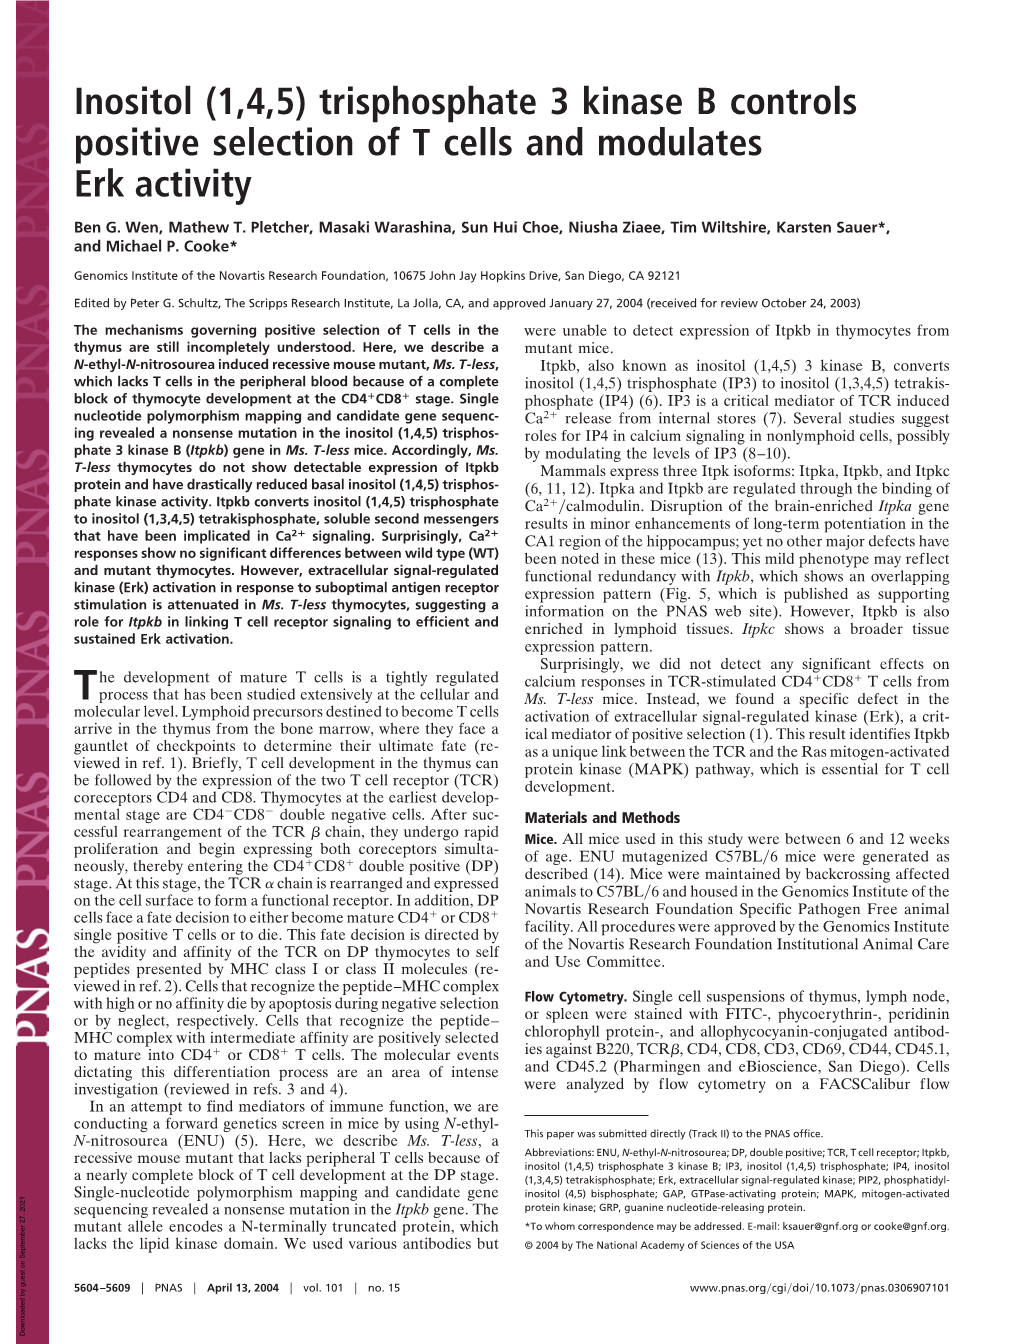 Inositol (1,4,5) Trisphosphate 3 Kinase B Controls Positive Selection of T Cells and Modulates Erk Activity